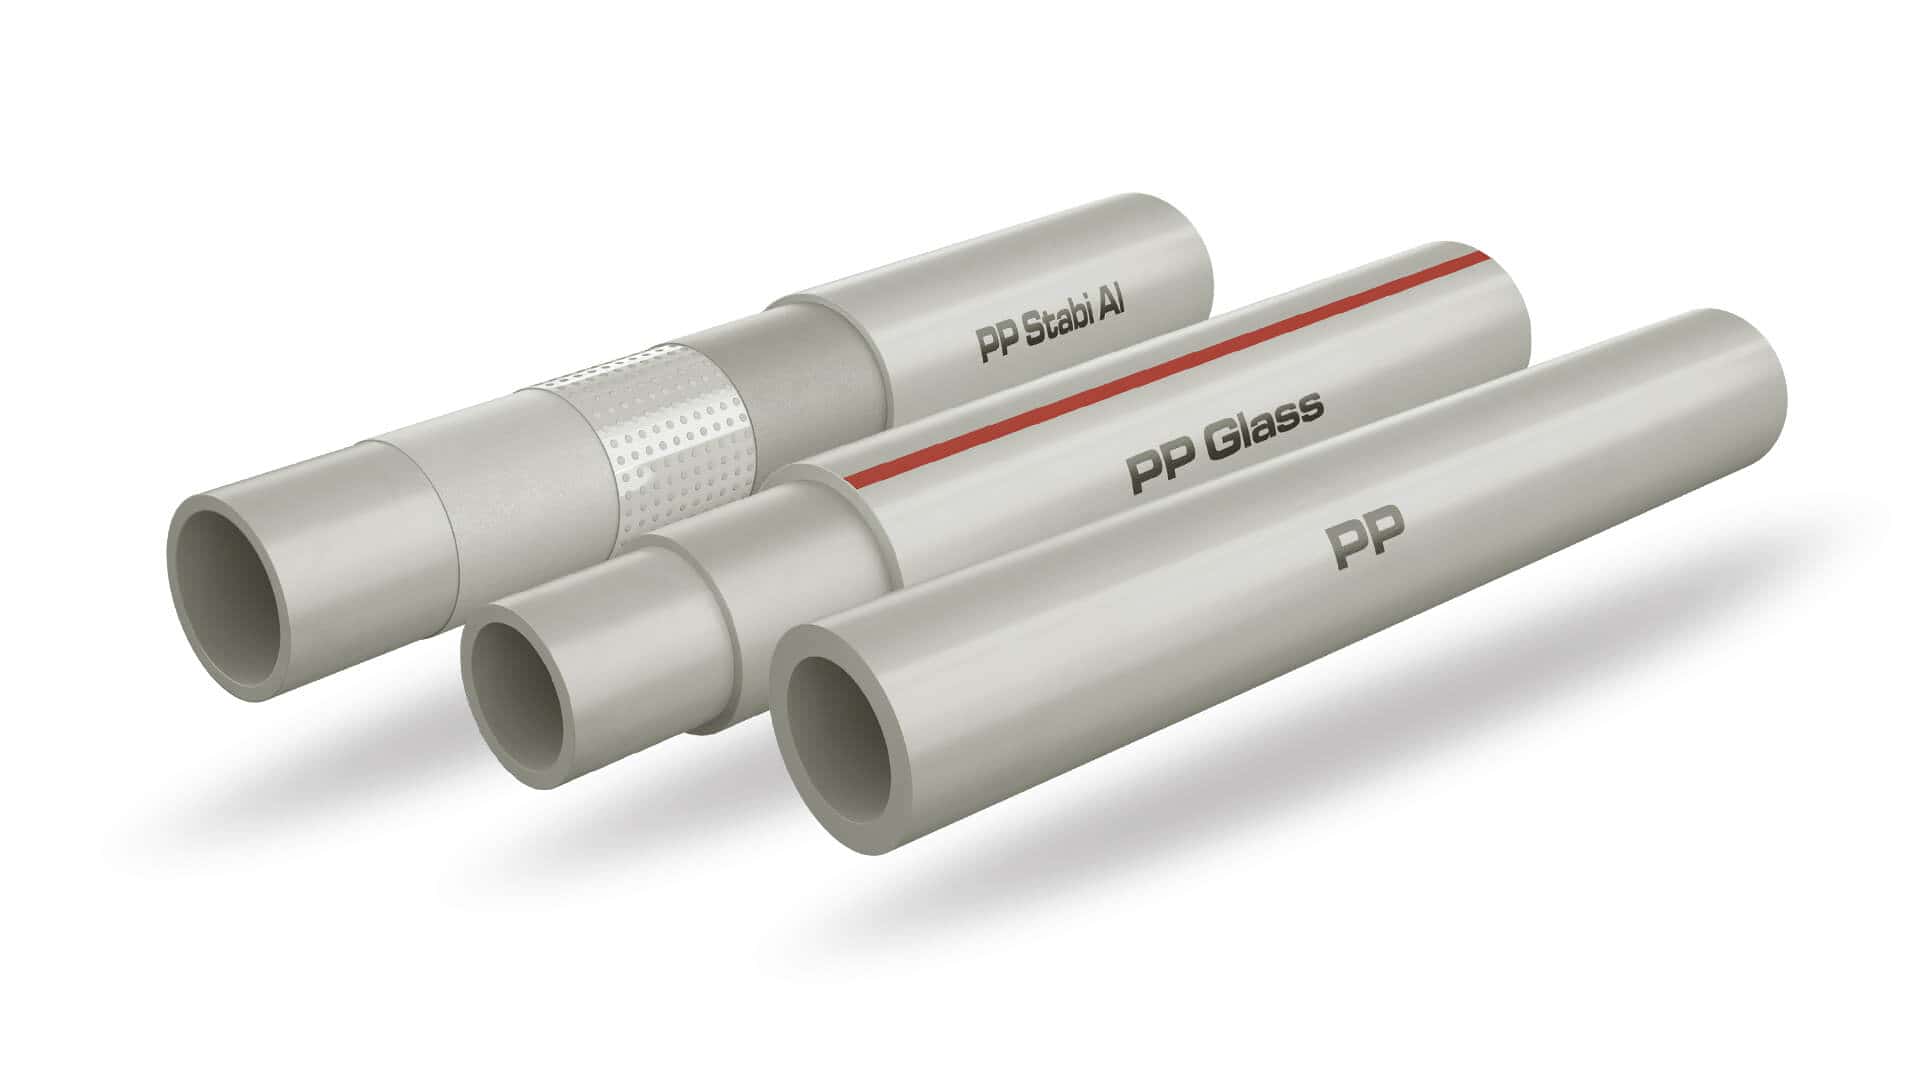 KAN-therm - PP system - 3d pipe models PP systems - PP, PP Glass, PP Stabi.